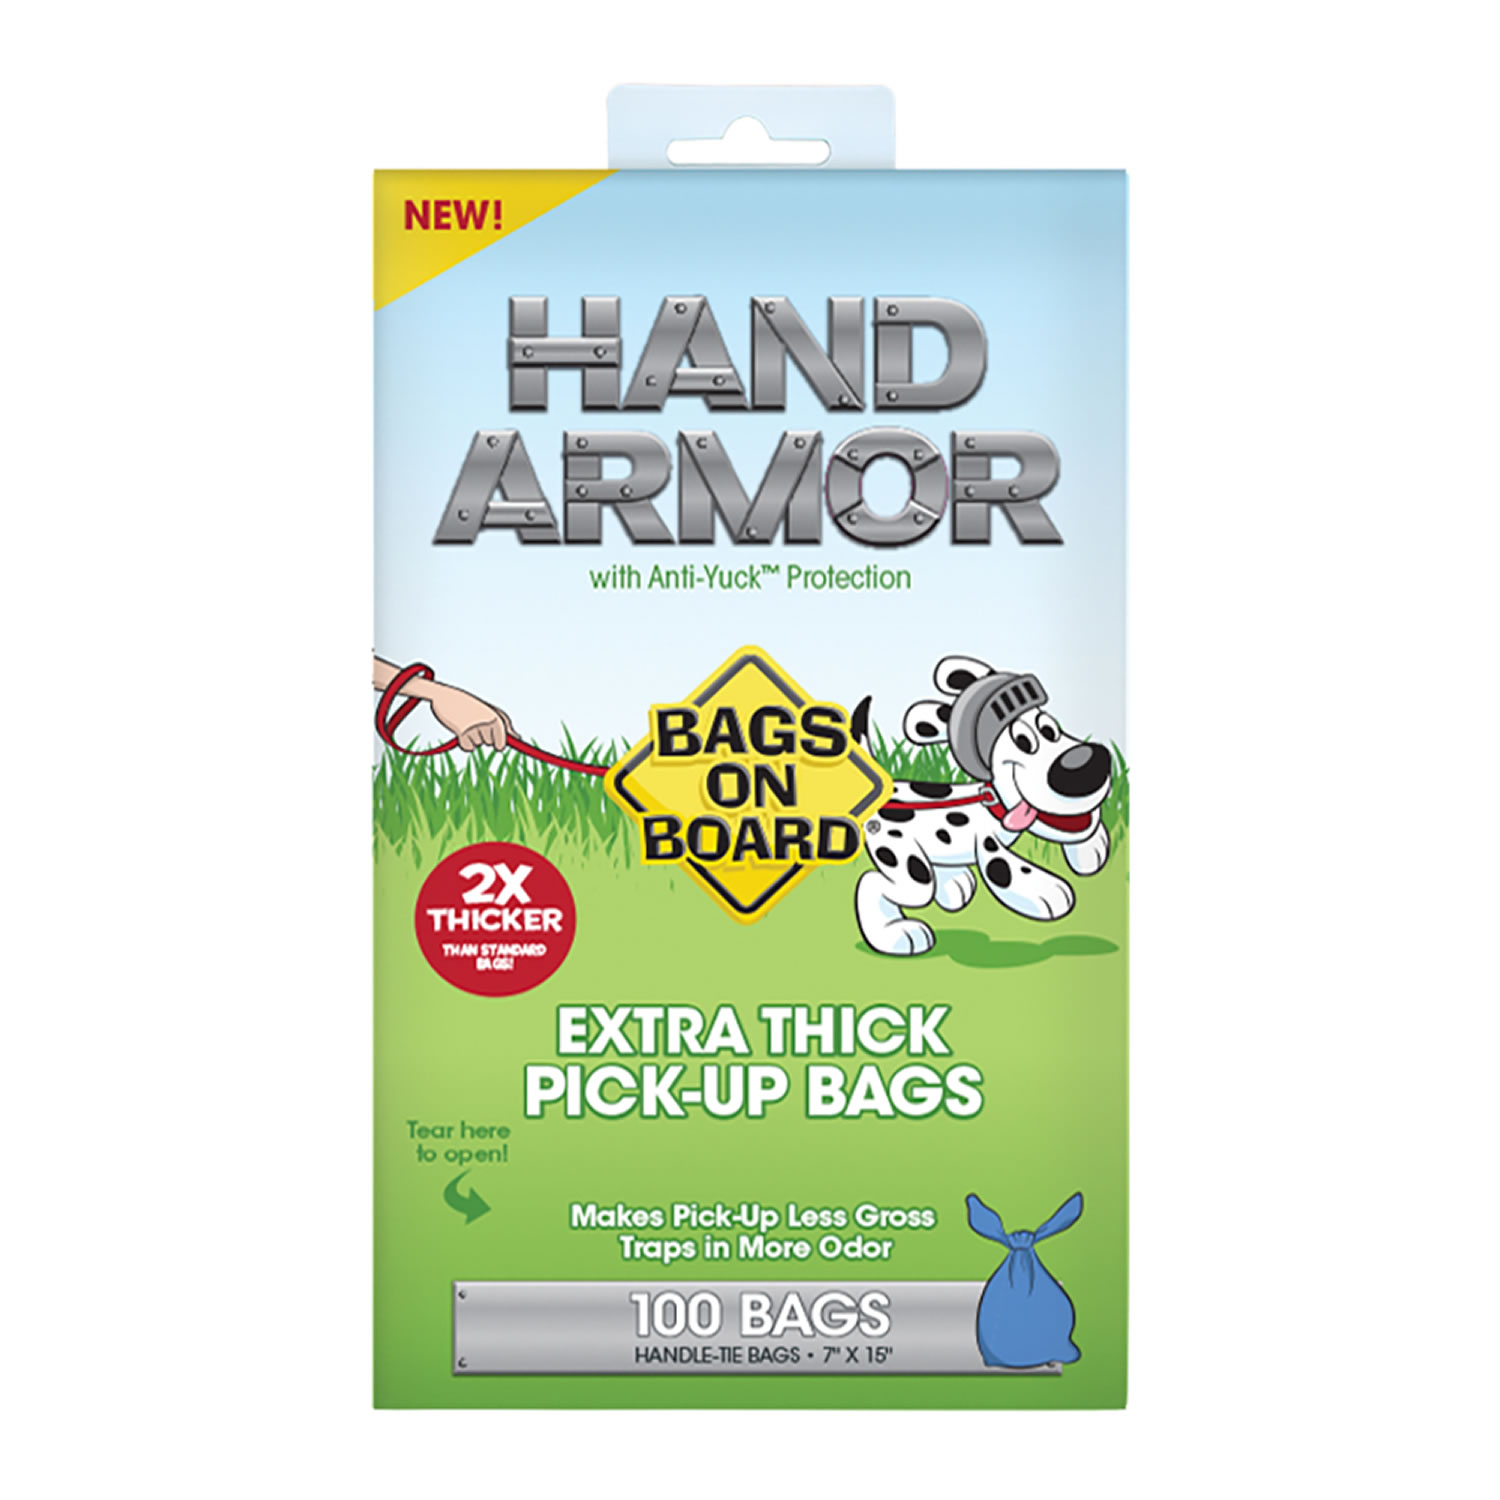 BAGS ON BOARD HAND ARMOUR 2X EXTRA THICK PICK-UP BAGS 100 BAGS 100 PACK